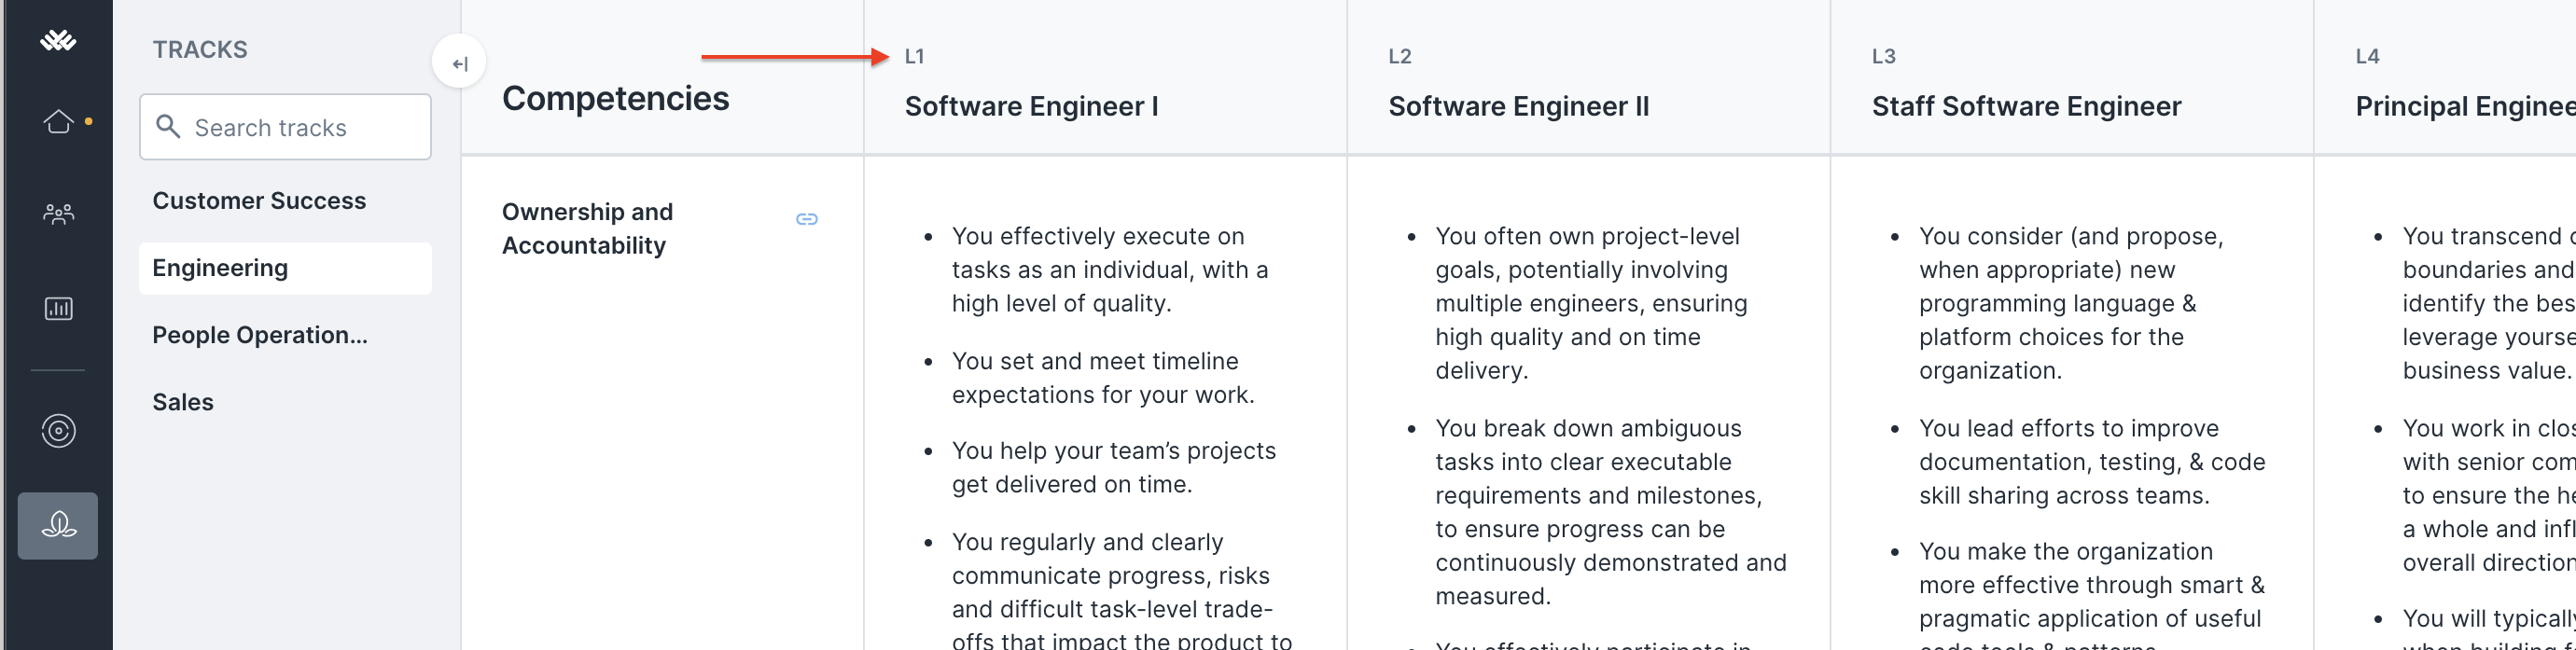 Track for Engineering. An arrow points to the Job Level attribute L1 connected to the Software Engineer I level.